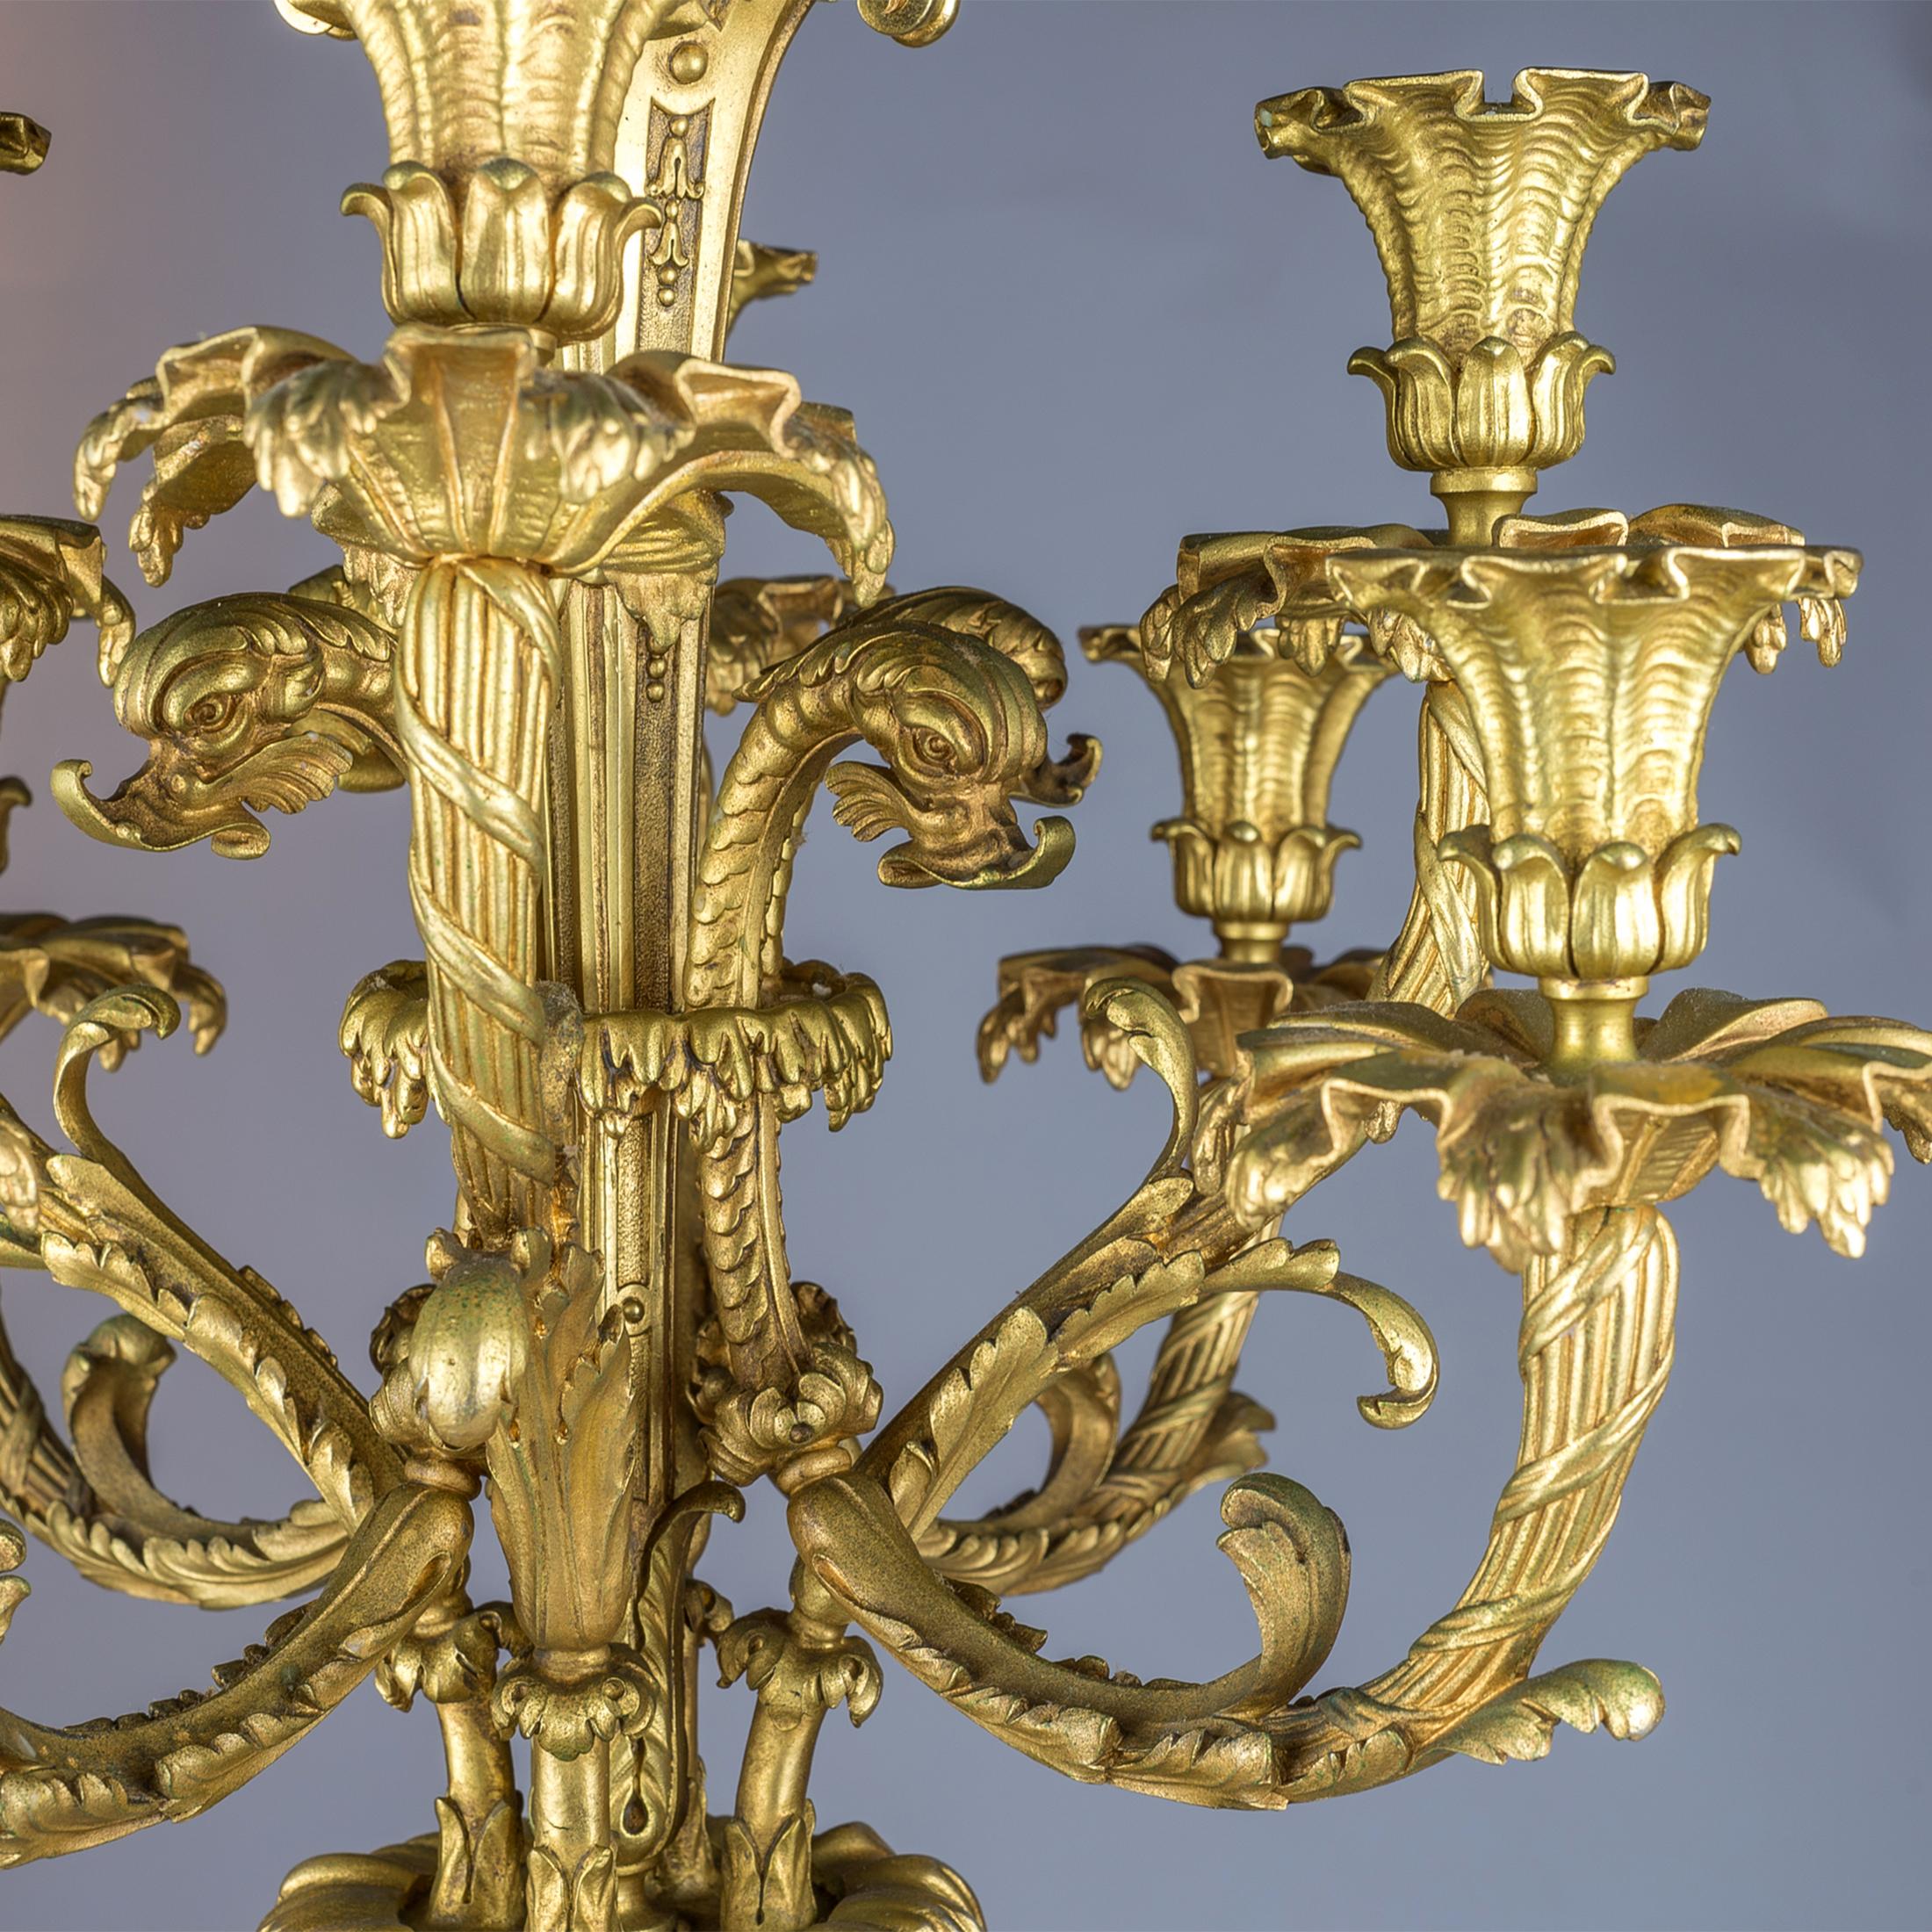 19th Century High Quality Pair of Patinated and Gilt Bronze Figural Candelabras